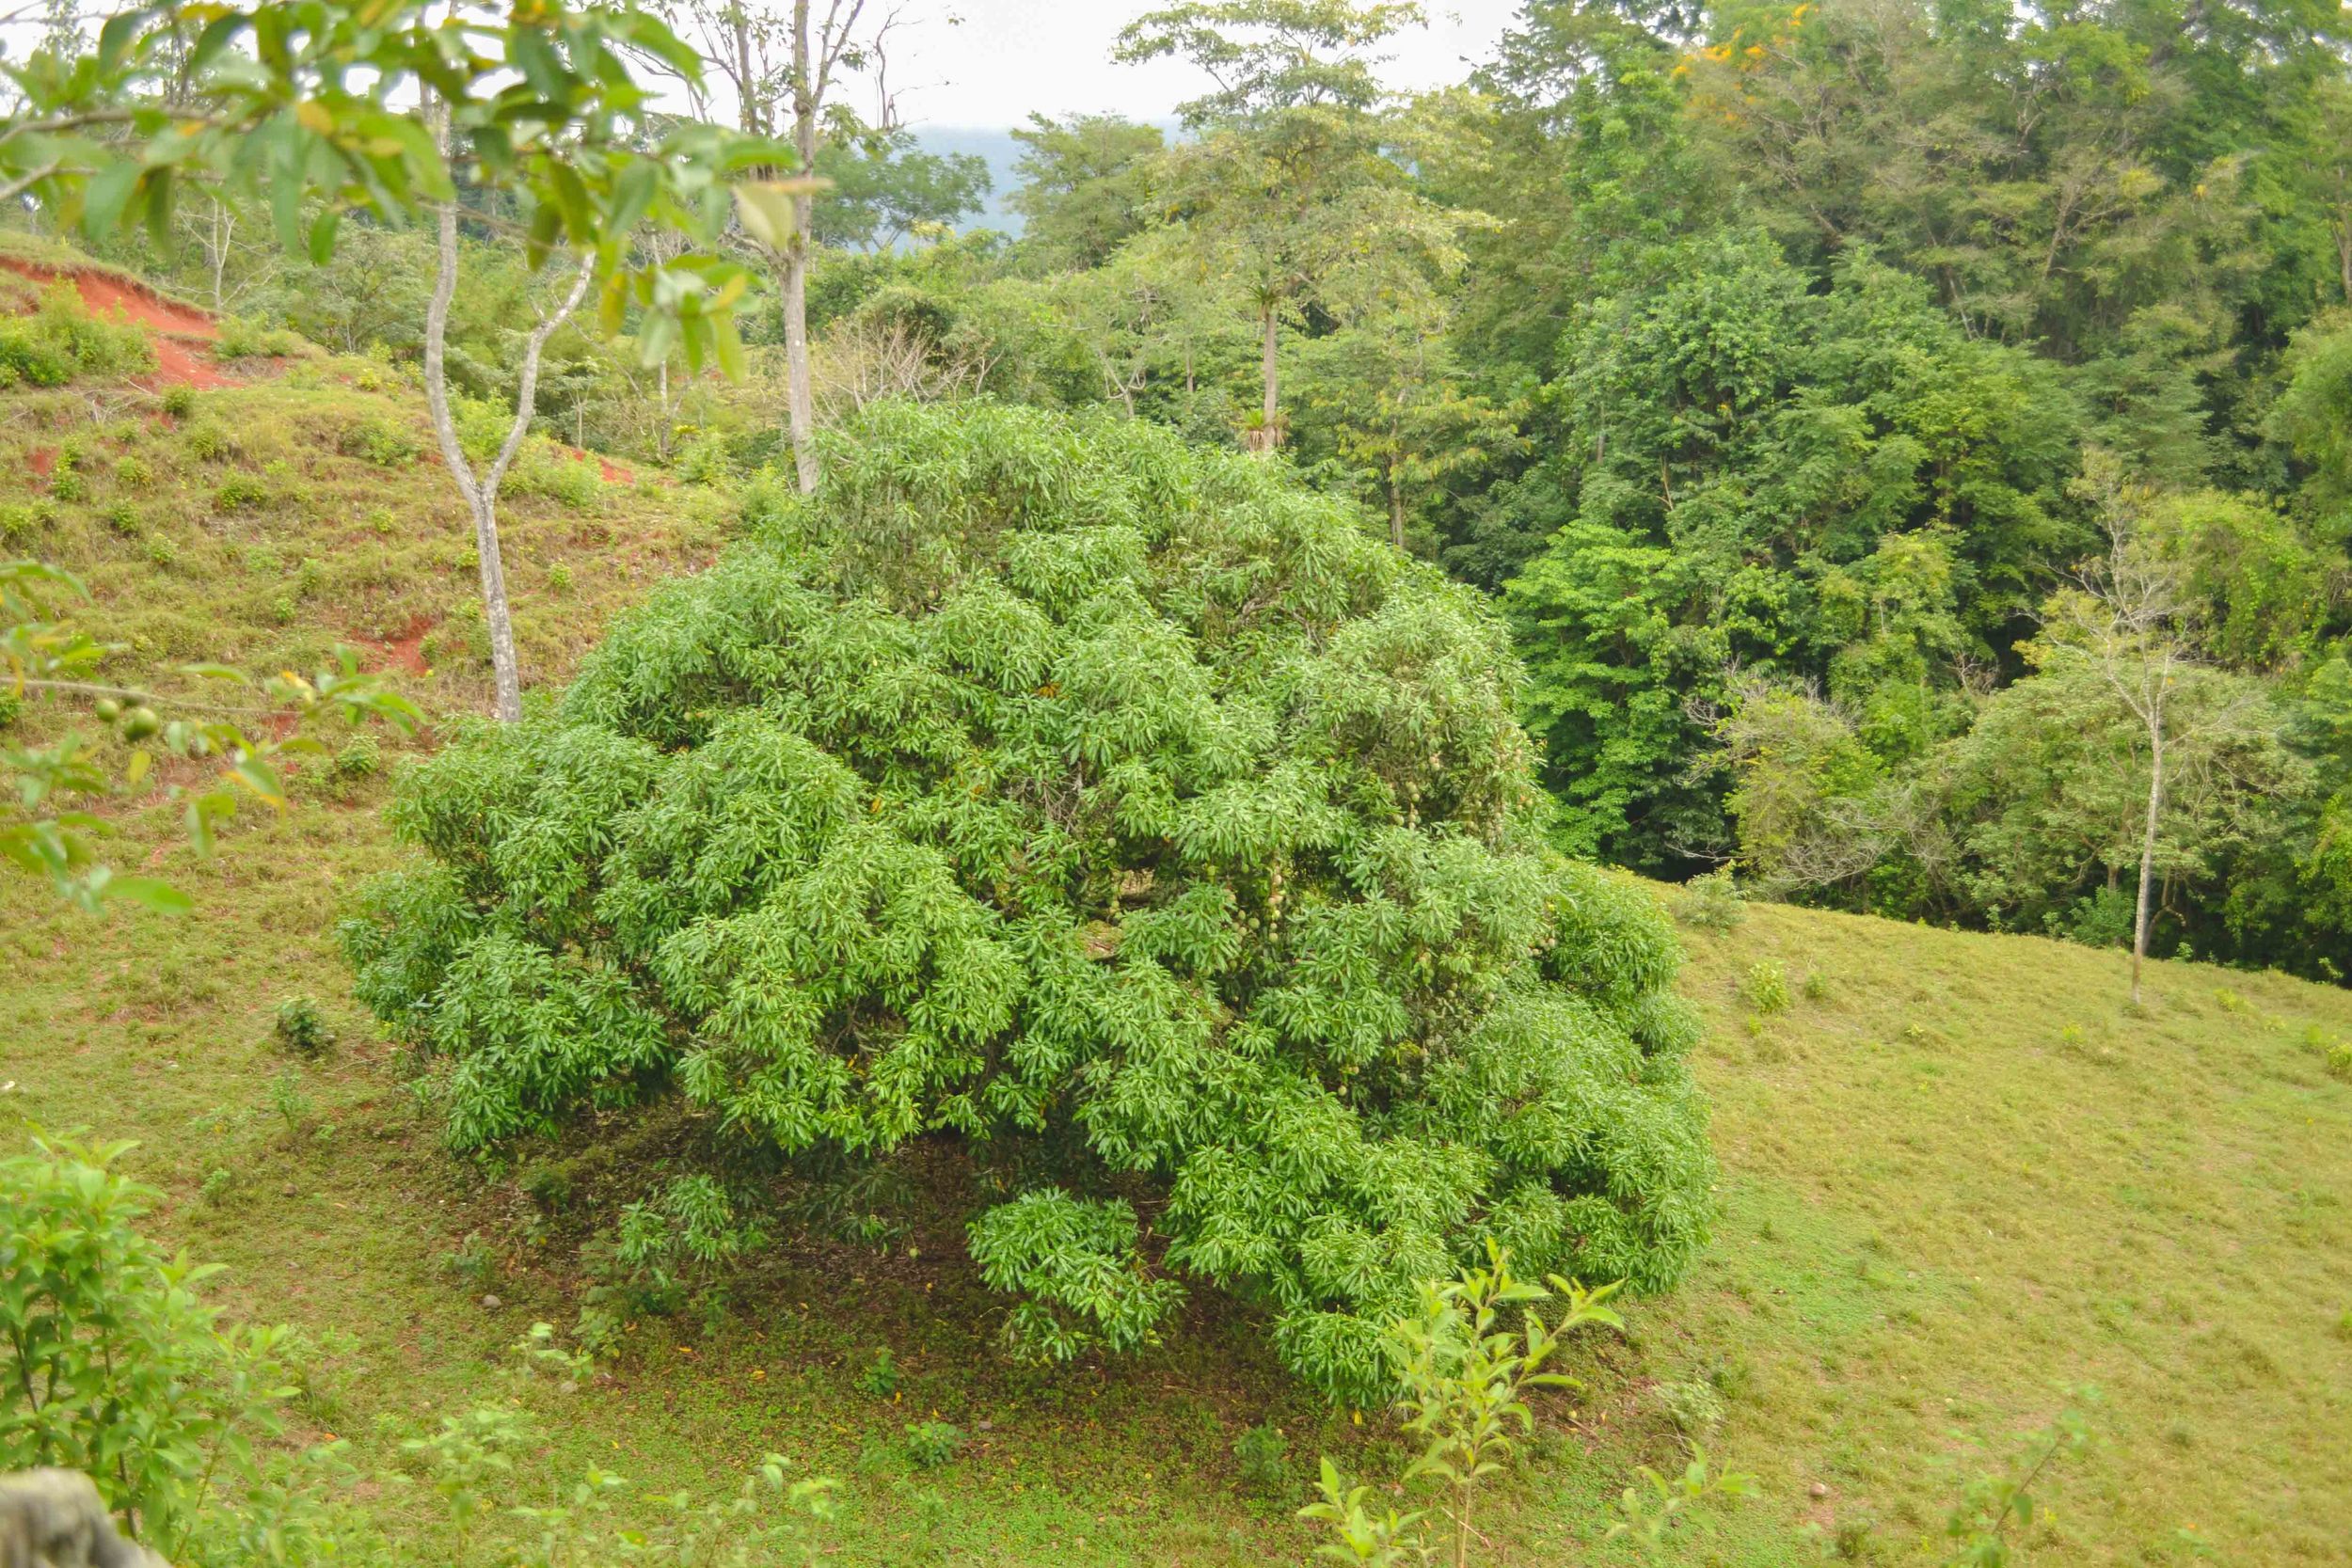  Manga tree: this tree on the neighboring farm's property produced huge female mangos (mangas) nearly the size of a football, so juicy and sweet to eat. 